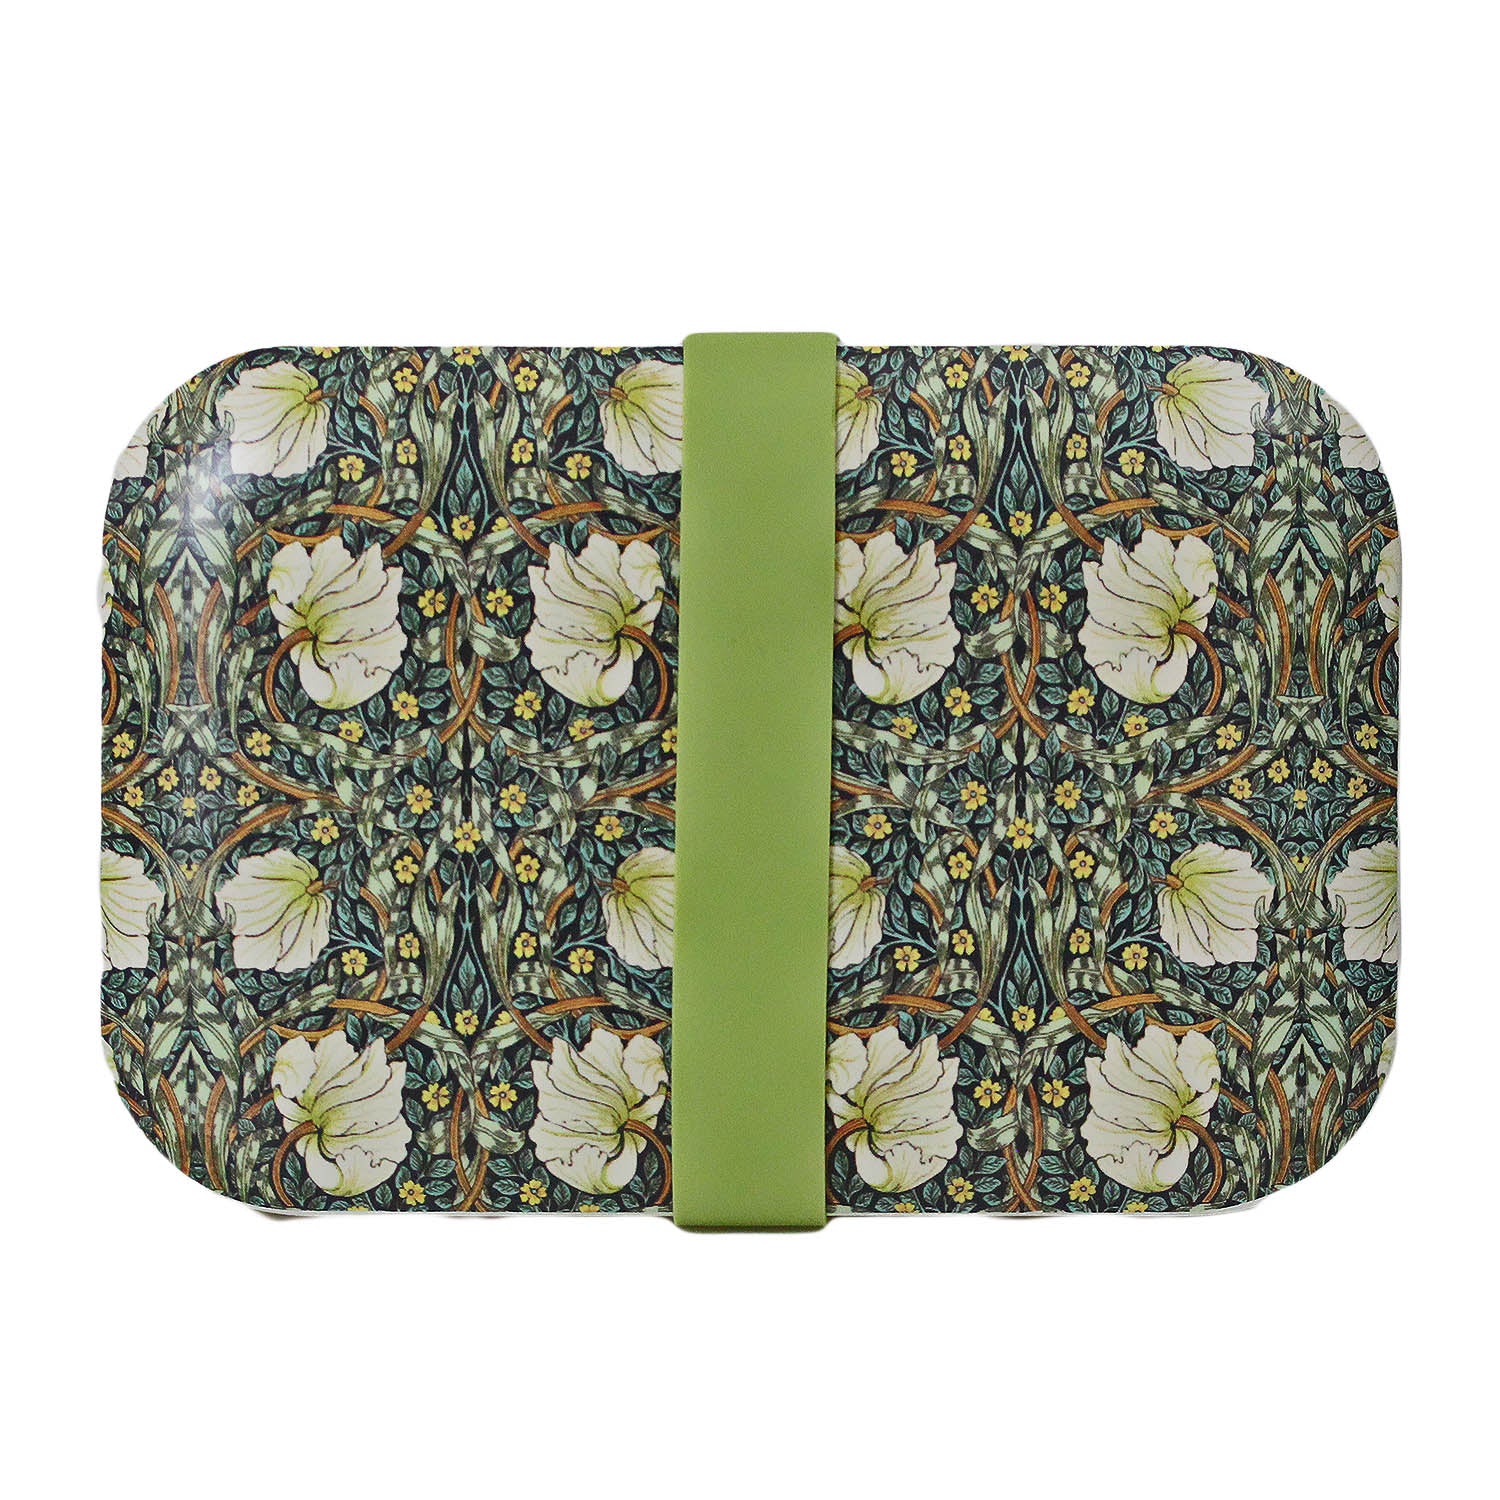 William Morris Pimpernel Floral Bamboo Lunch Box